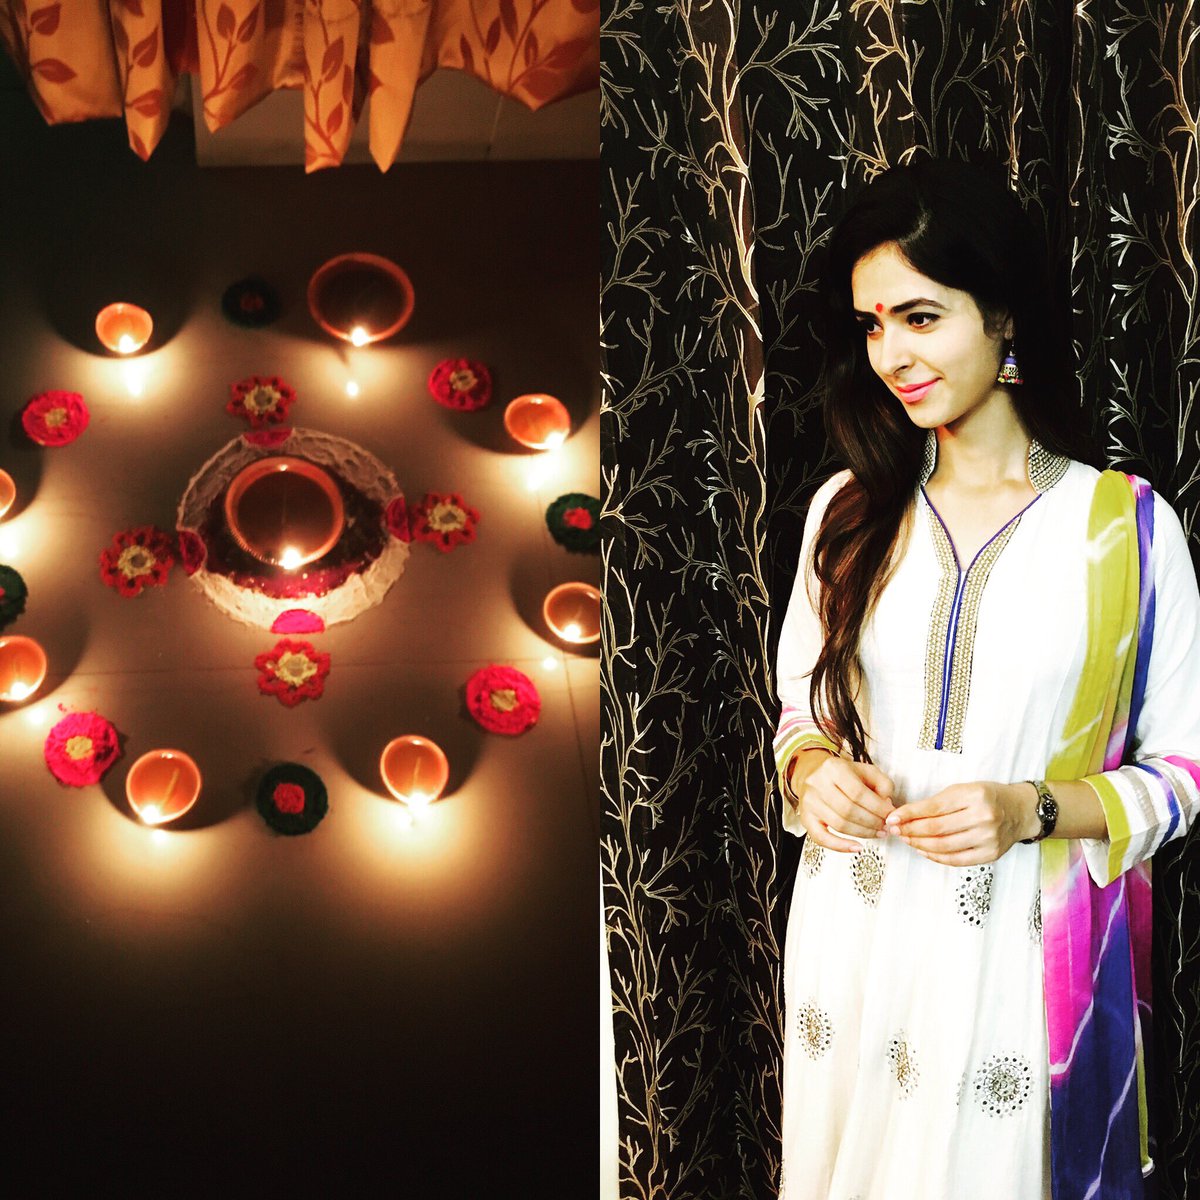 As d diwali week ends,i wud like 2 remind evry1 to keep following d path of light,evn as Diwali ends❤️